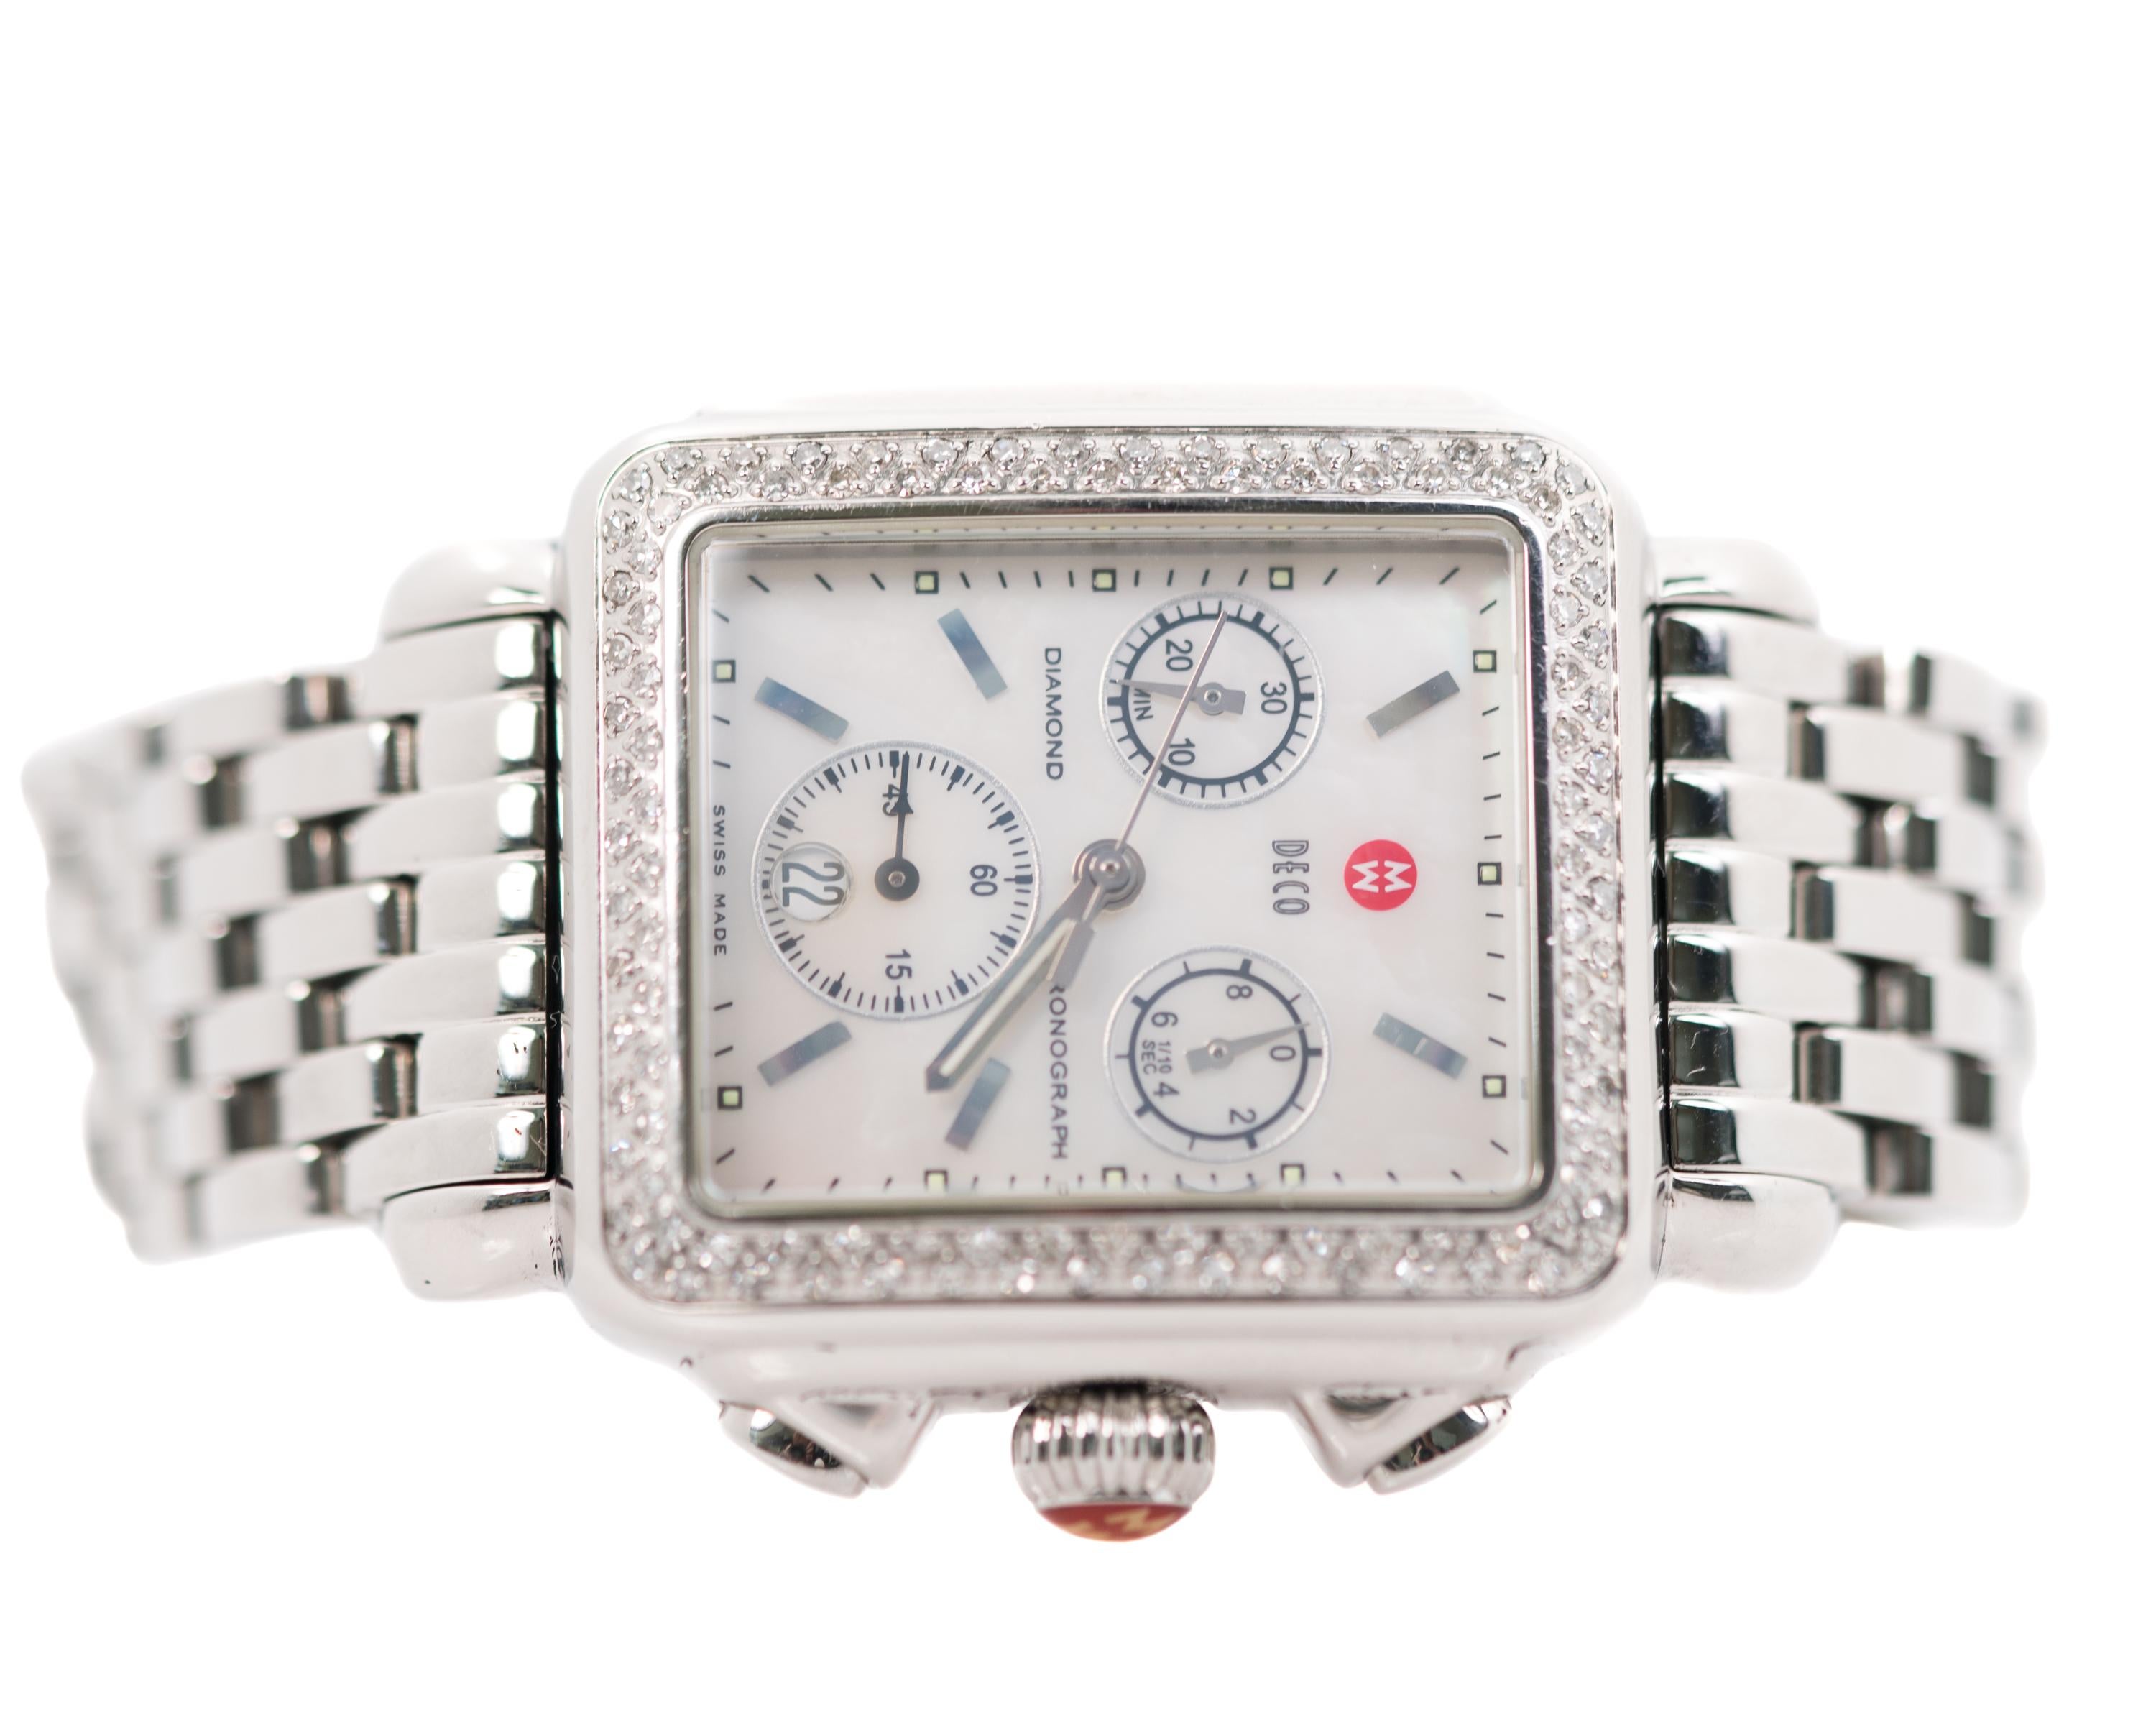 2006 Michele Deco Diamond Ladies Wrist Watch - Stainless Steel, Diamonds
Ref. MW06A01

Features:
0.60 carats total weight Diamonds
Mother of Pearl Dial
Stainless Steel Case and Bracelet
3 Subdials
Date Window at 6:00
Silver Hands and Hour Markers